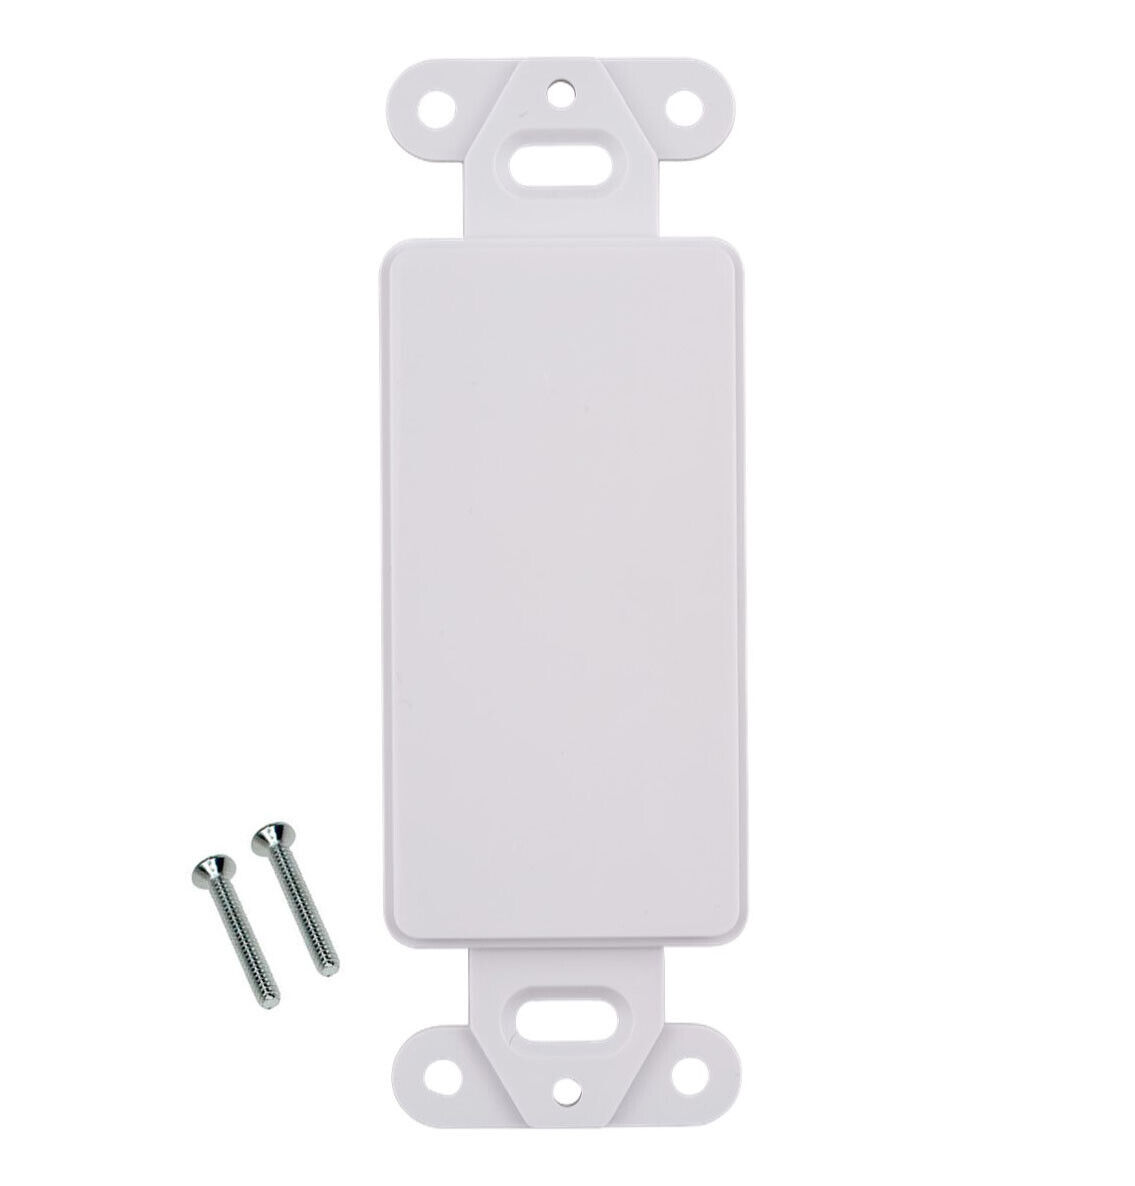 Decora Keystone Jack Wall Plates Snap-In White 0 1 2 3 4 Port Multipack LOT